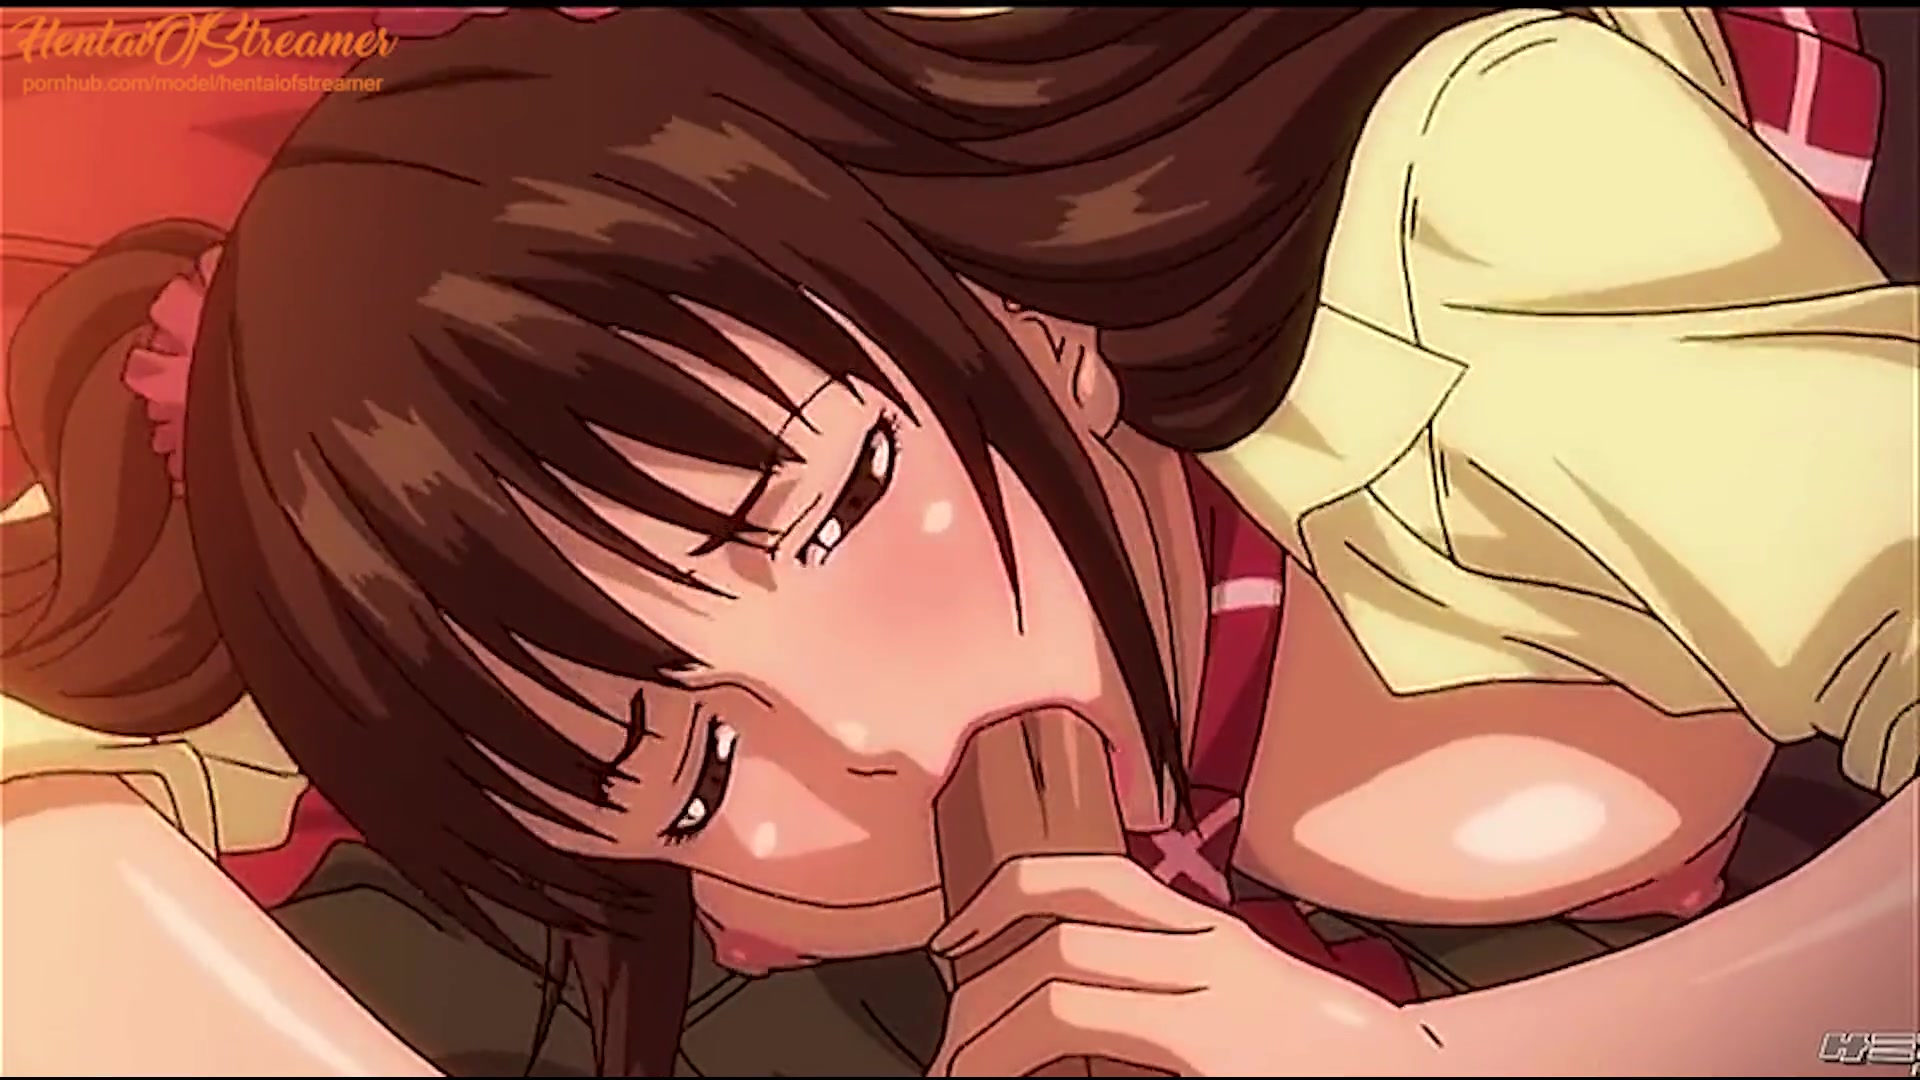 Anime Porn Uncensored - Hotwife Dude Sees his Gf Plumb and Deep-Throat off another Stud - Anime Porn, Anime picture